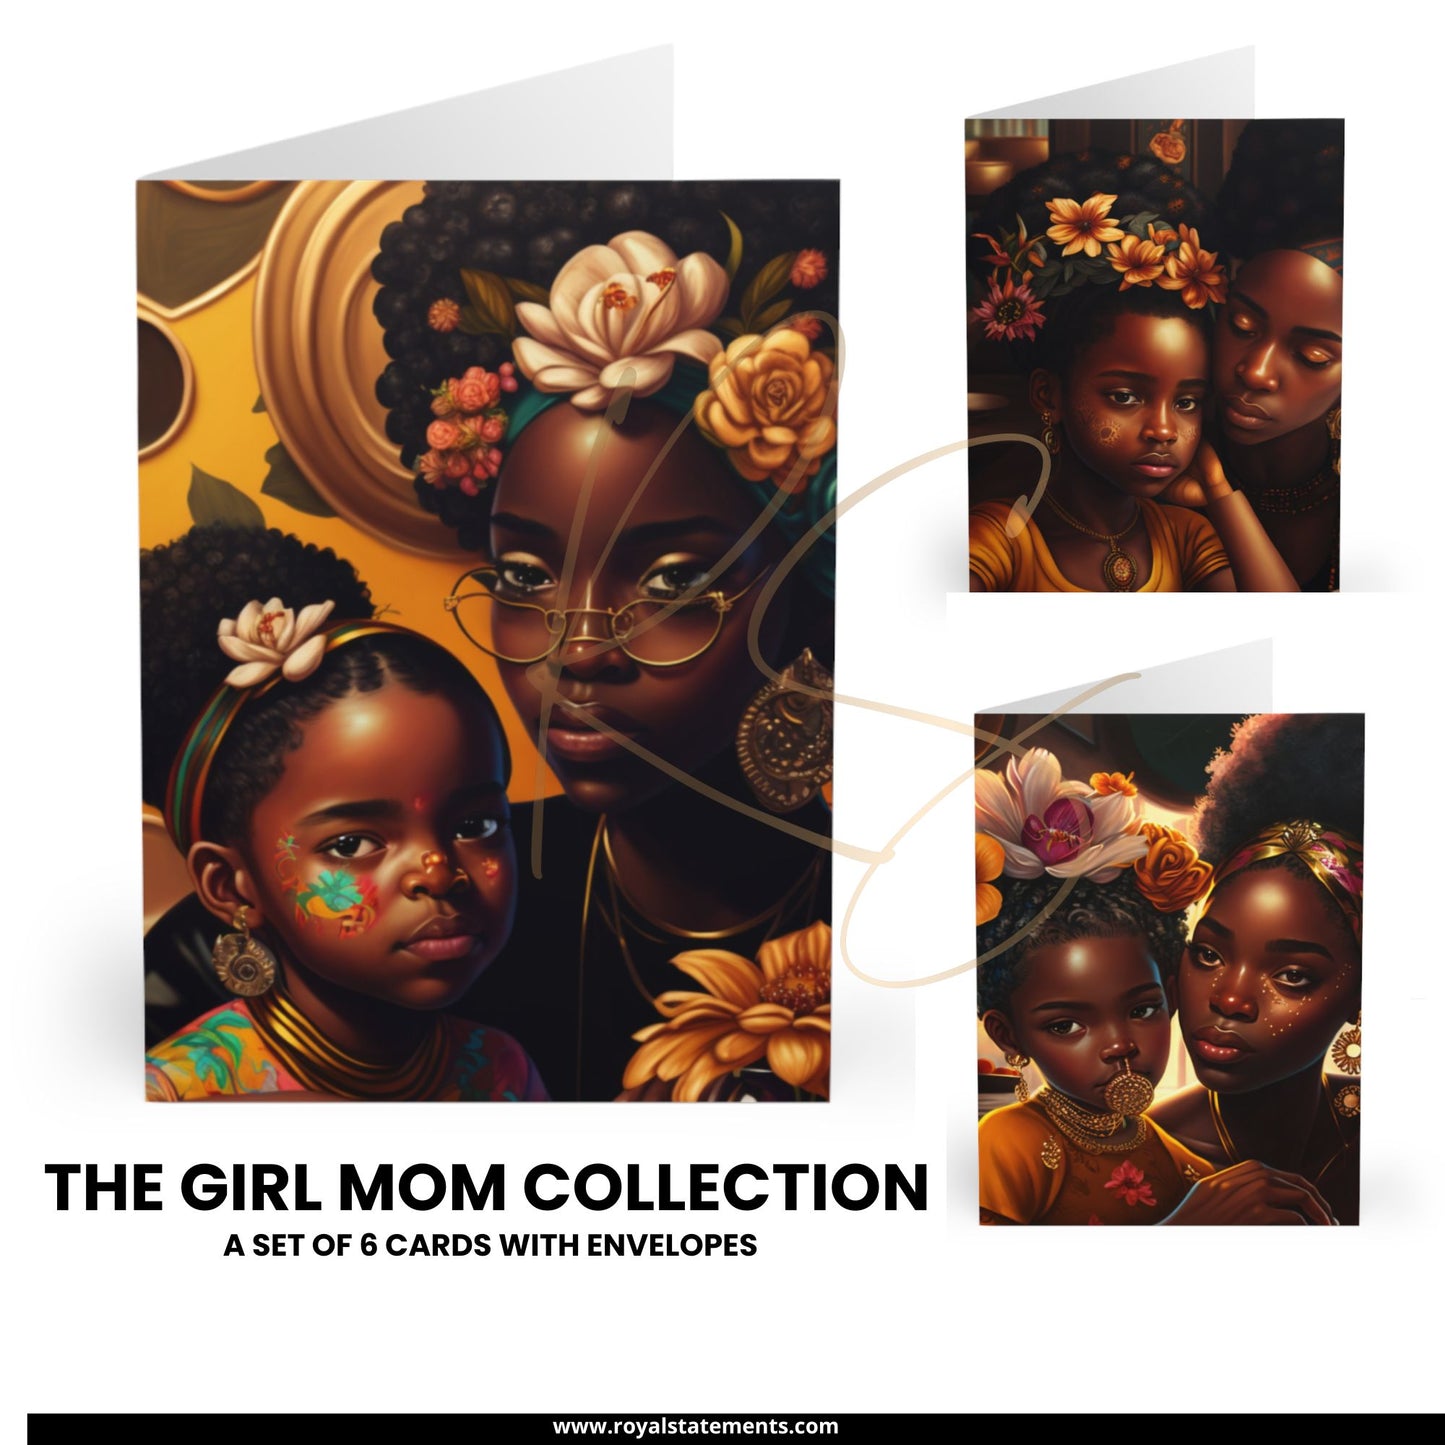 The Girl Mom Collection